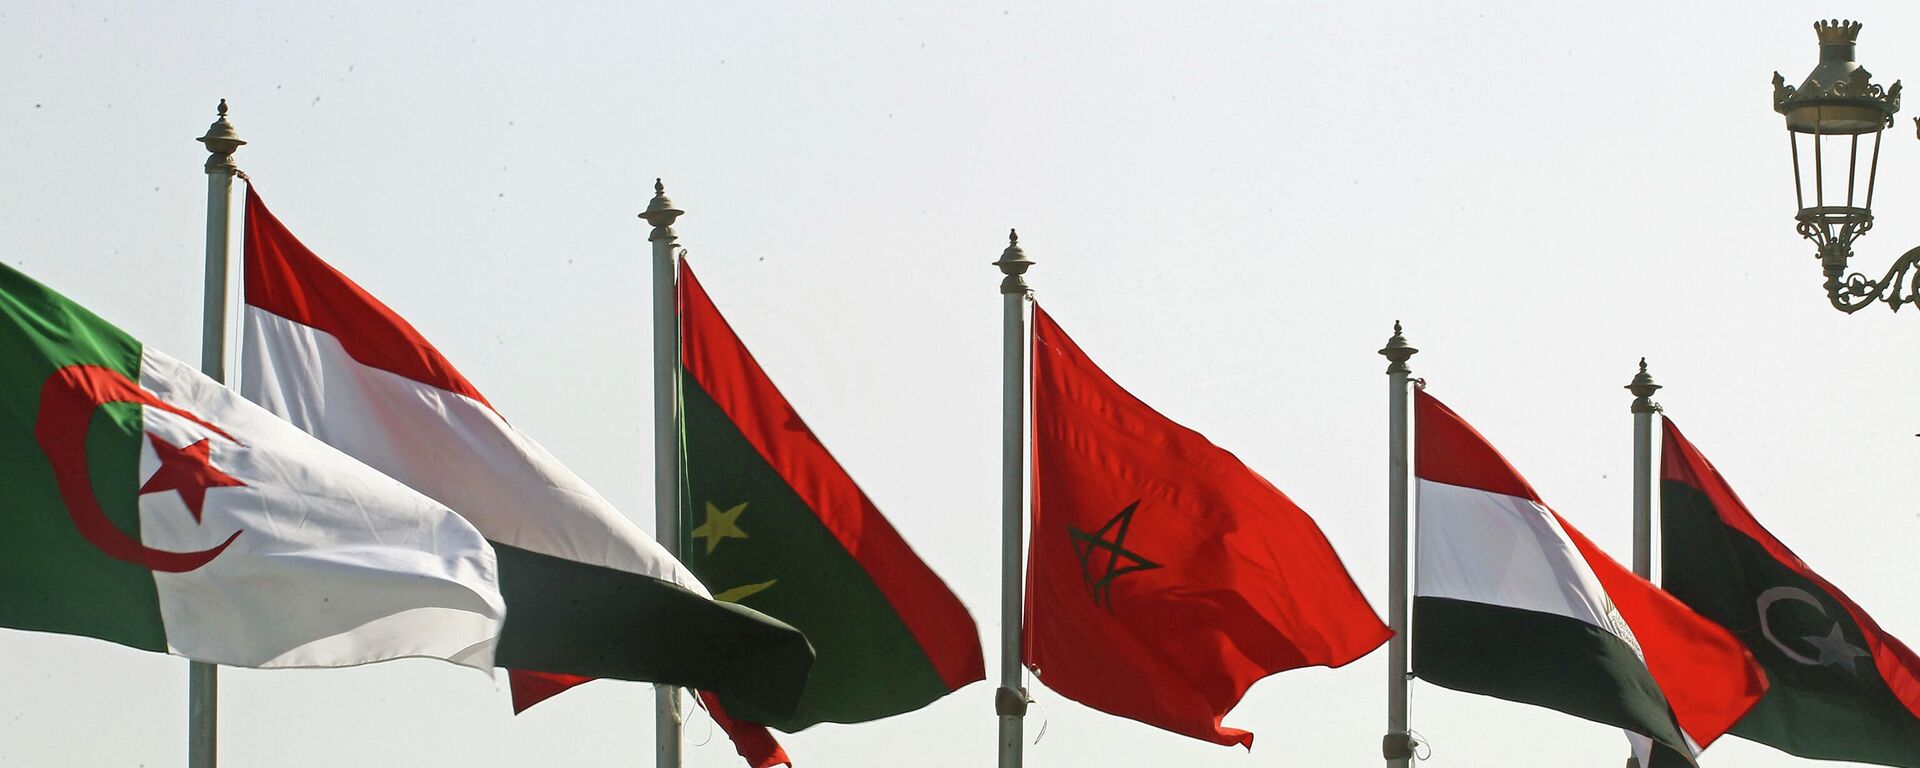 Flags of Arab countries are seen in Algiers, Algeria, Monday, Oct. 31st, 2022. Algeria is readying to host the 31st Arab League Summit, the first since the outbreak of the coronavirus pandemic. In the three years that's passed, new challenges have drastically reshaped the region's agenda, with the establishment of diplomatic ties between Israel and the gulf, and the fallout of the crisis in Ukraine. - Sputnik International, 1920, 16.04.2023